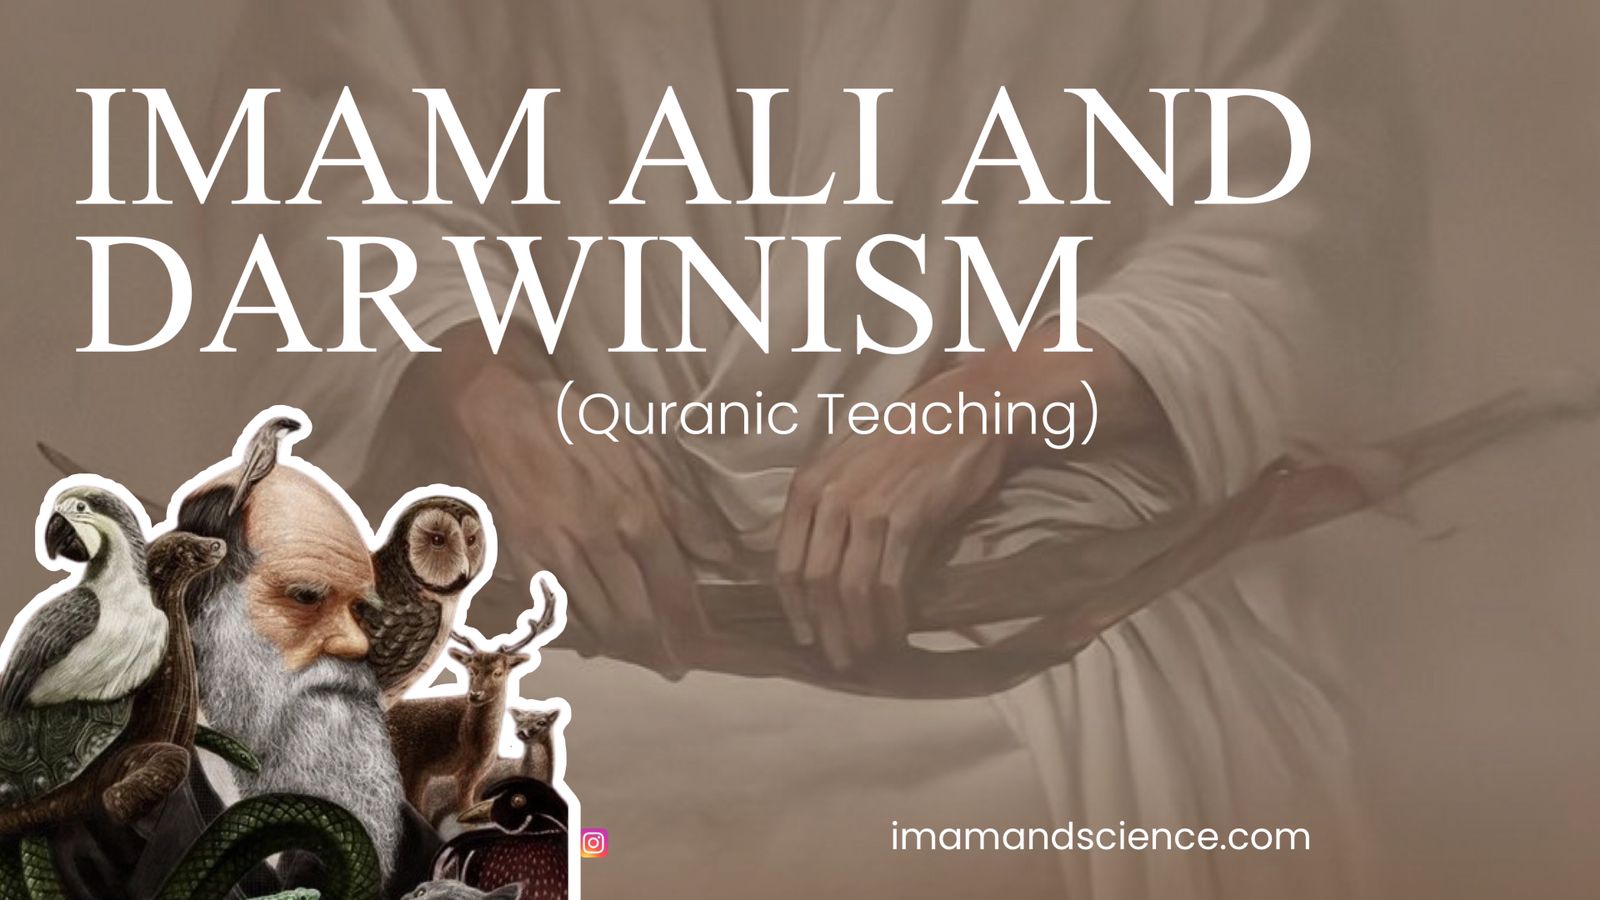 Imam Ali and the concept Darwinism (Quranic Teachings)